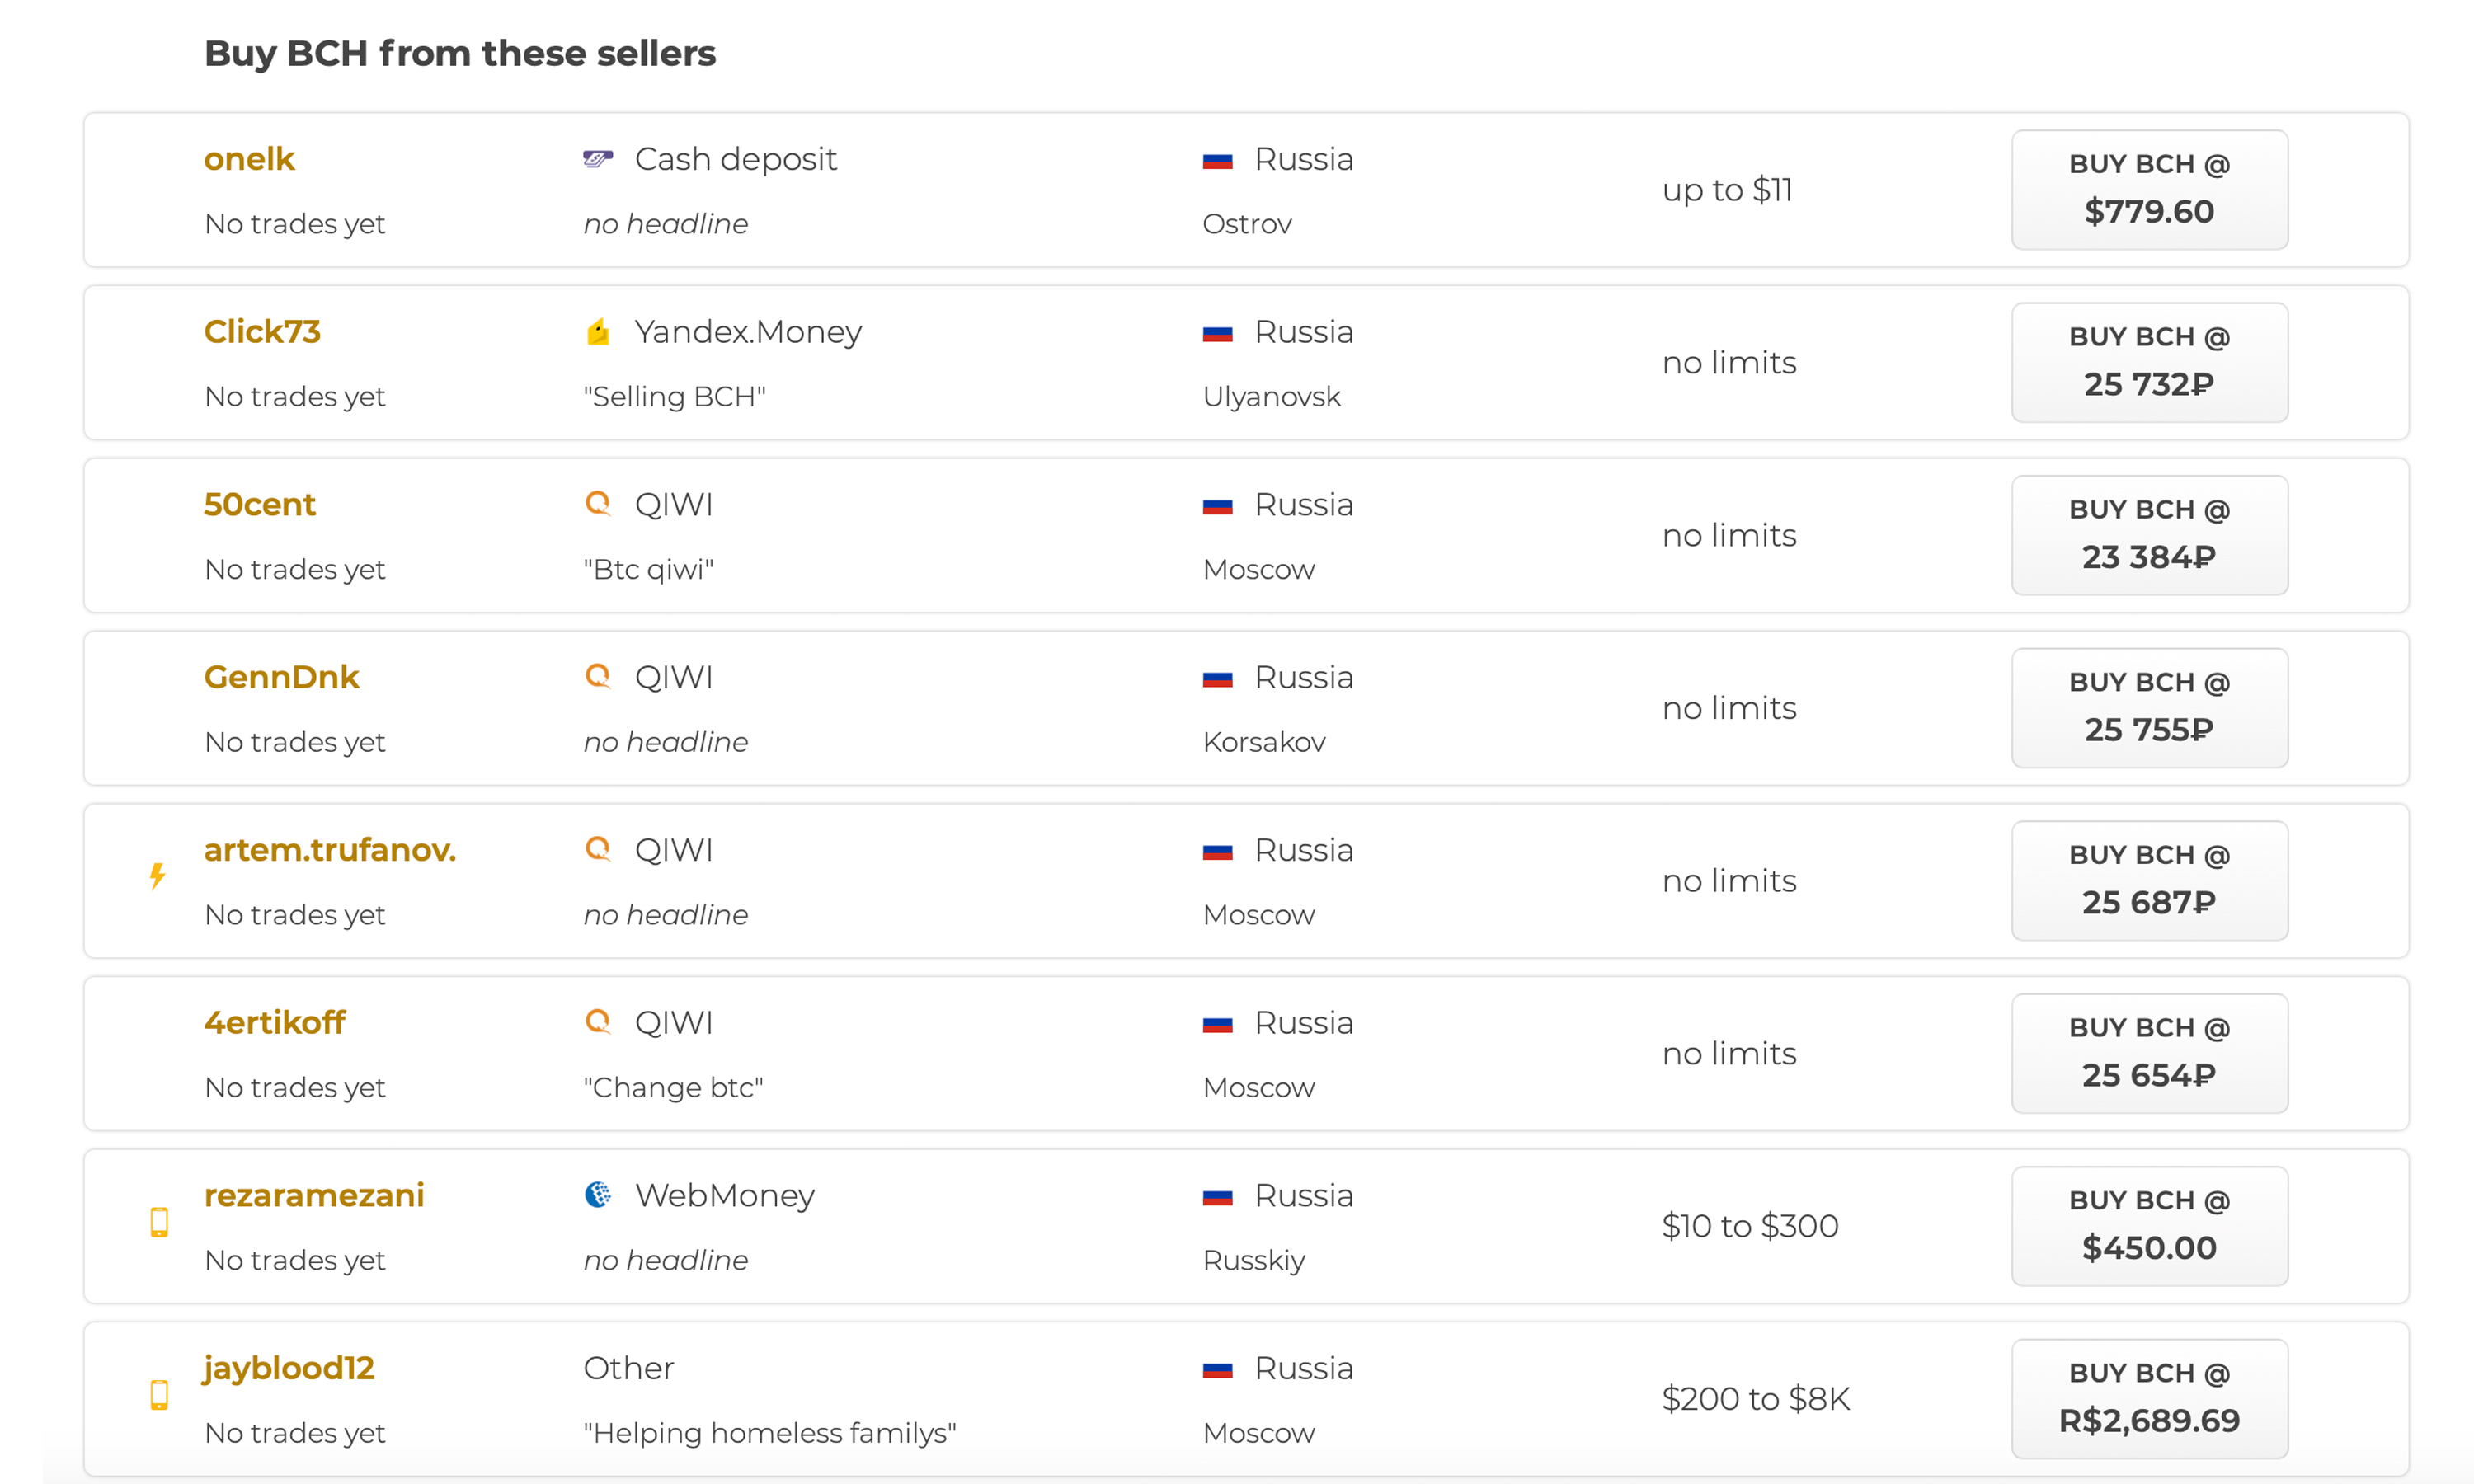 Local.Bitcoin.com Shows Lots of Active BCH Listings From Traders Worldwide